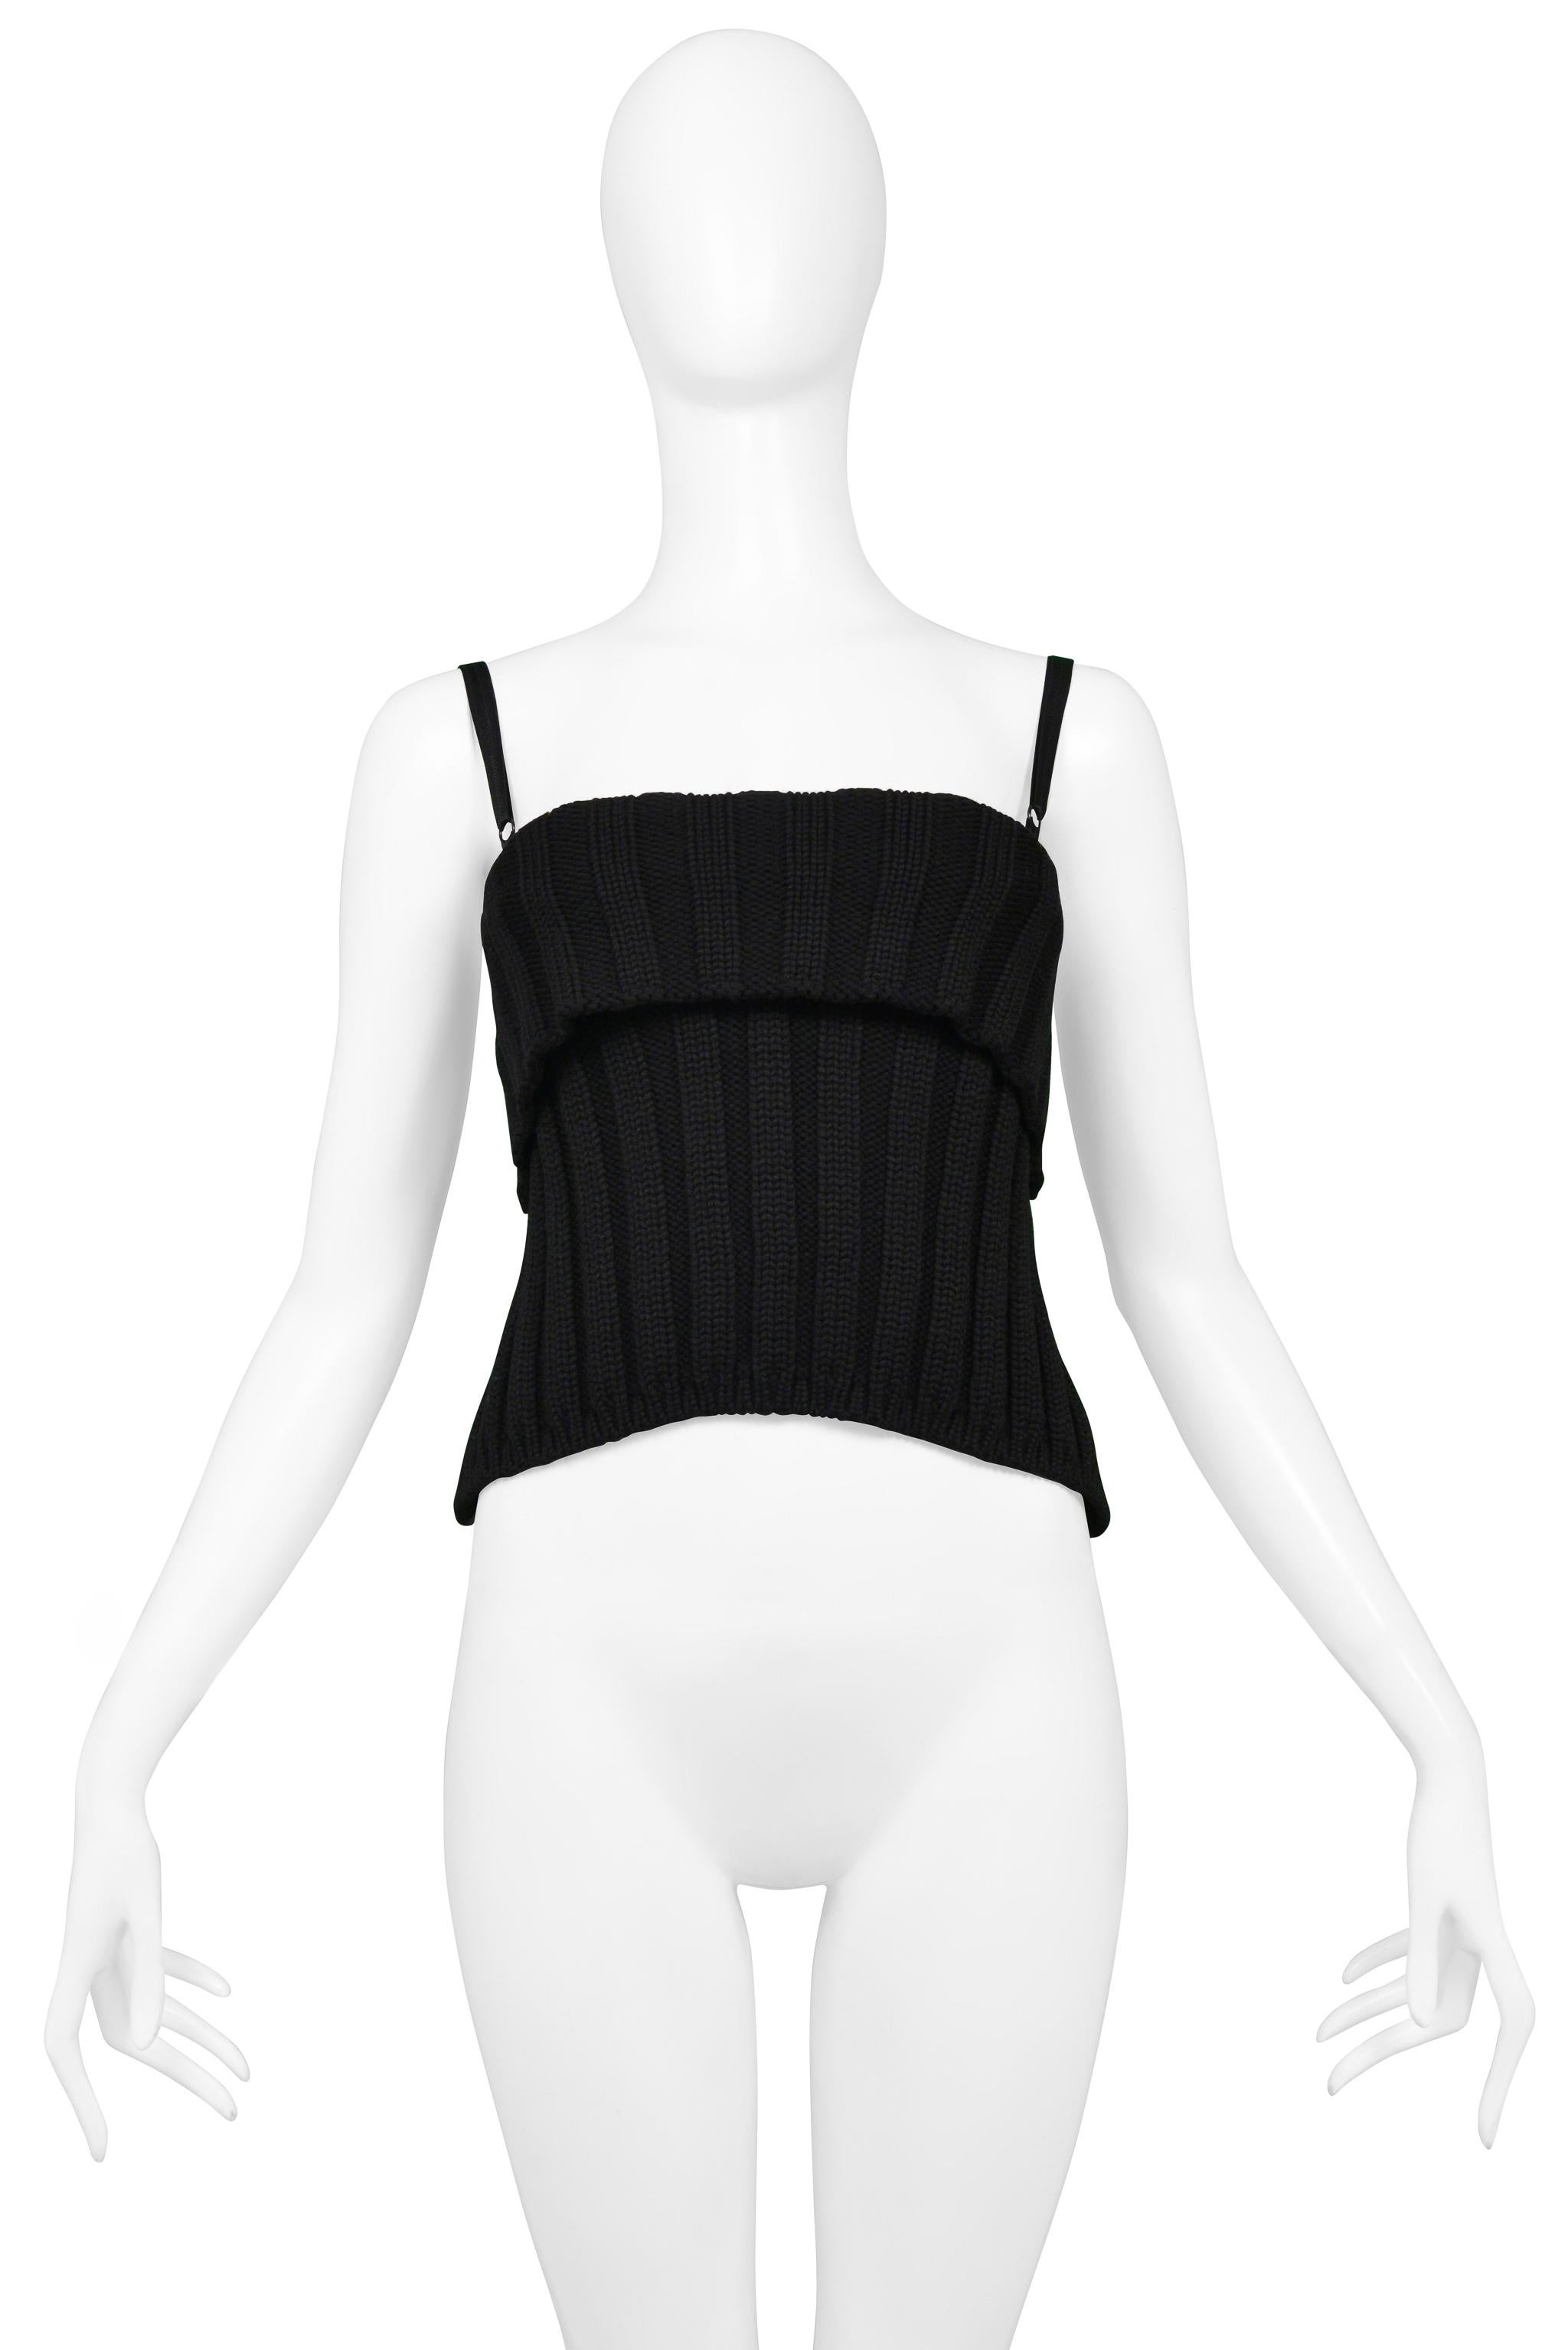 Dolce & Gabbana Black Knit Corset Top With Attached Bra 1999 In Excellent Condition In Los Angeles, CA